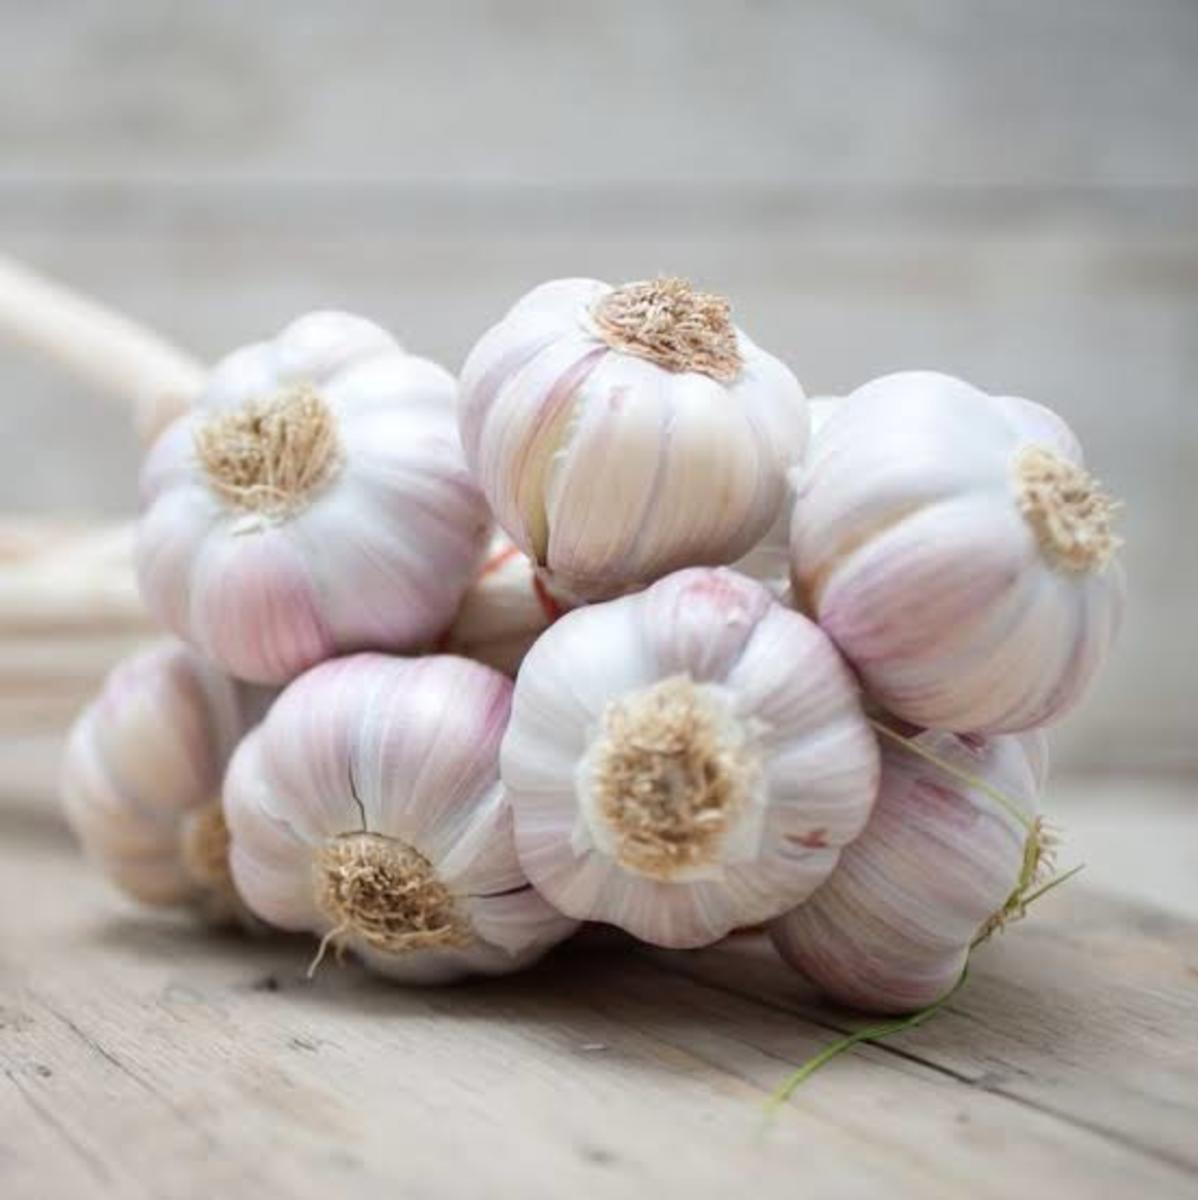 10 Health Benefits of Garlic That You Did Not Know